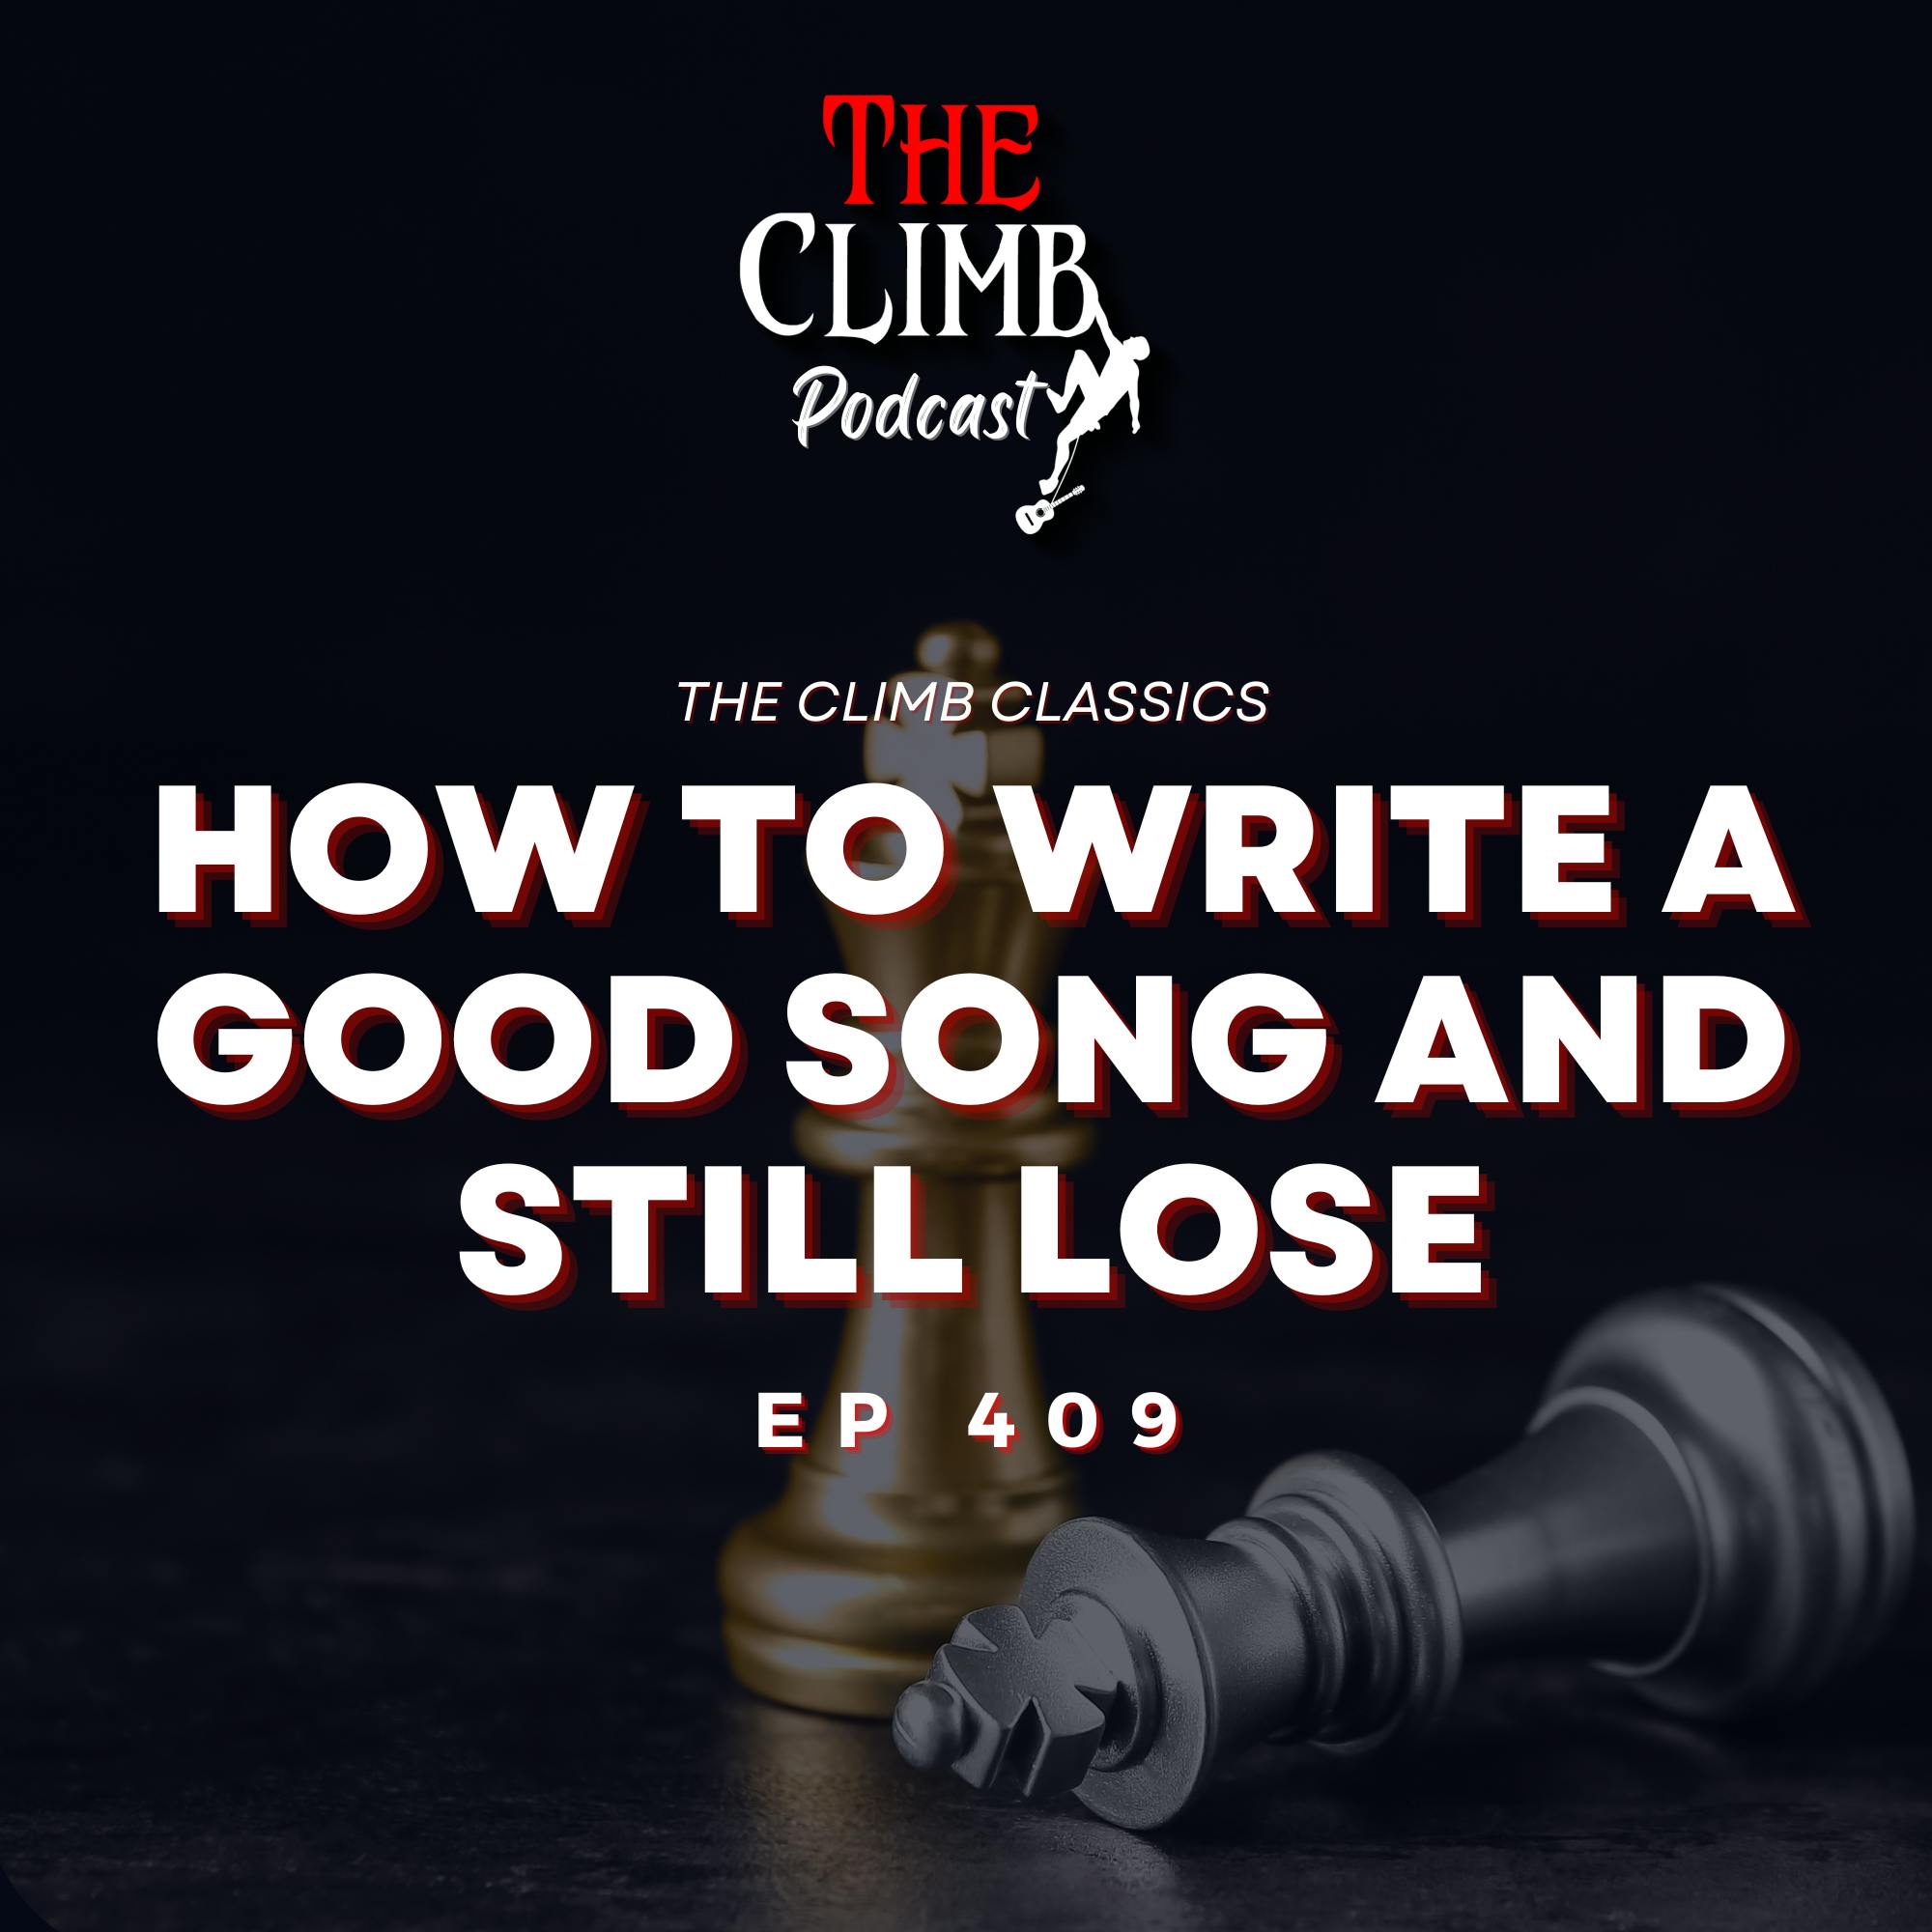 Ep 409: CLIMB CLASSIC-”How To Write A Good Song And Still Lose”